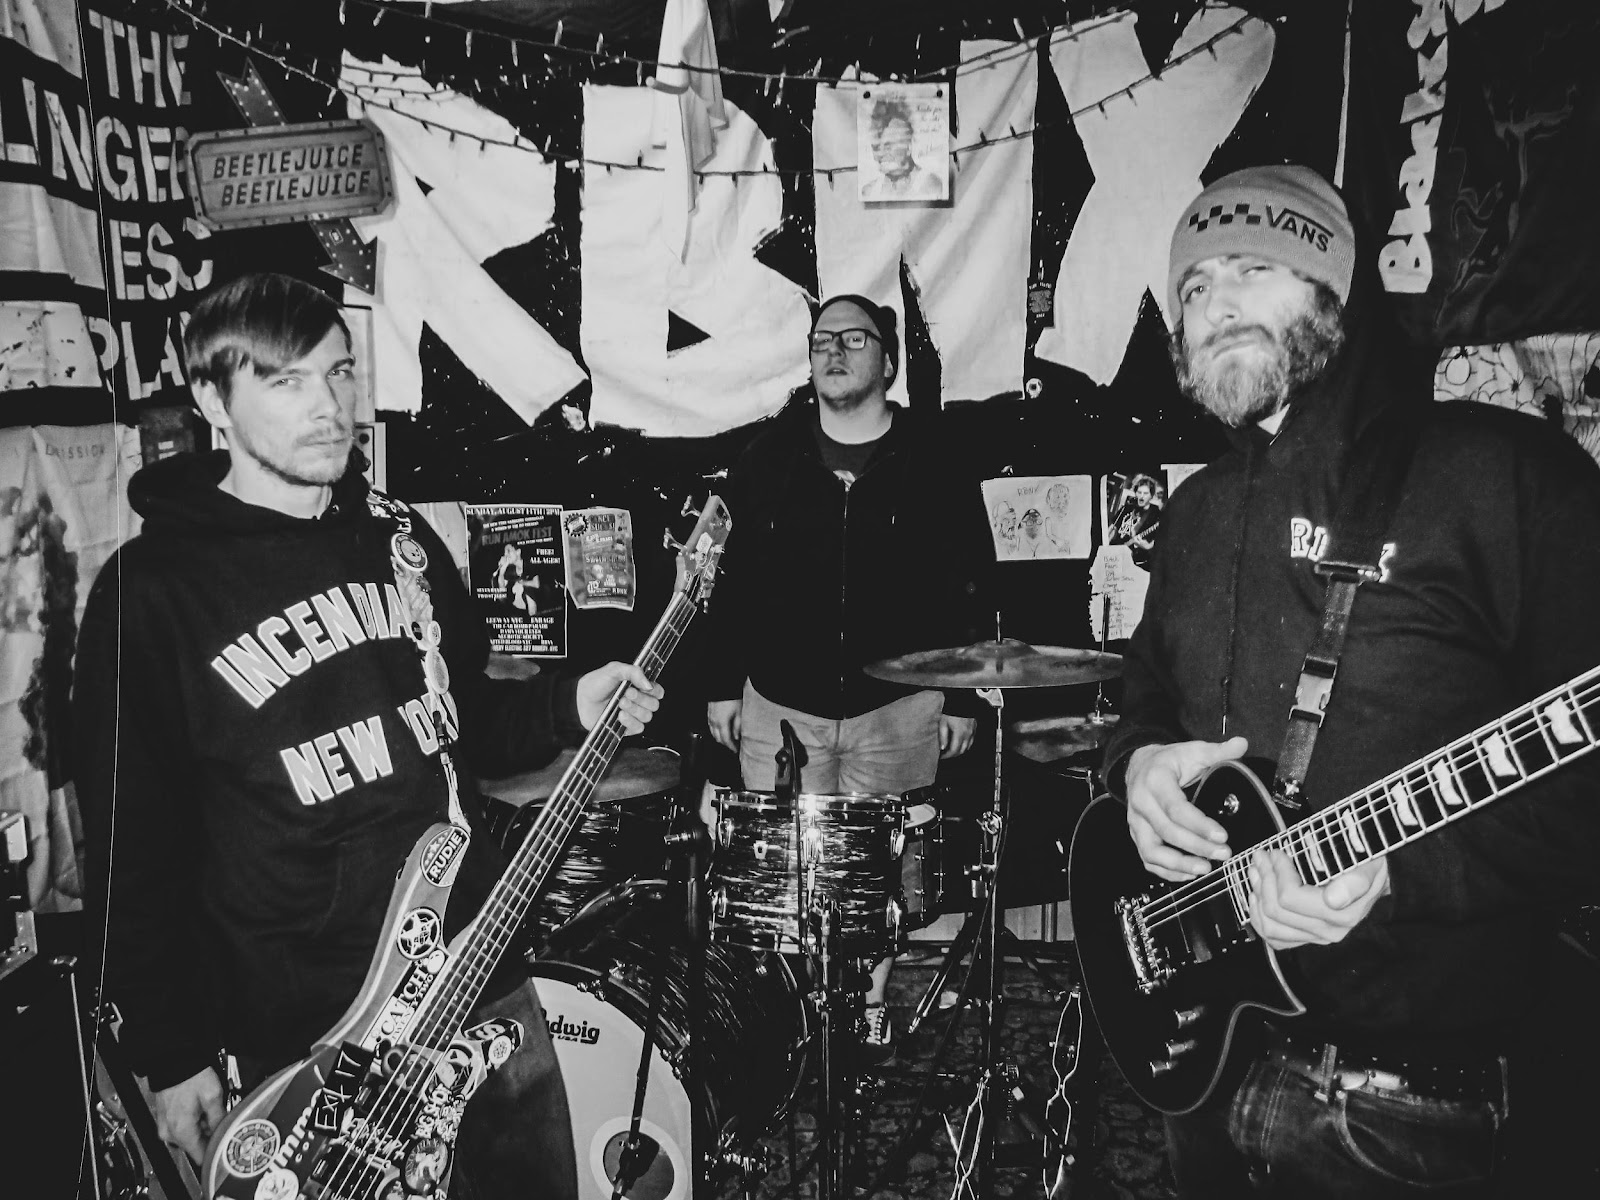 RBNX band in black and white